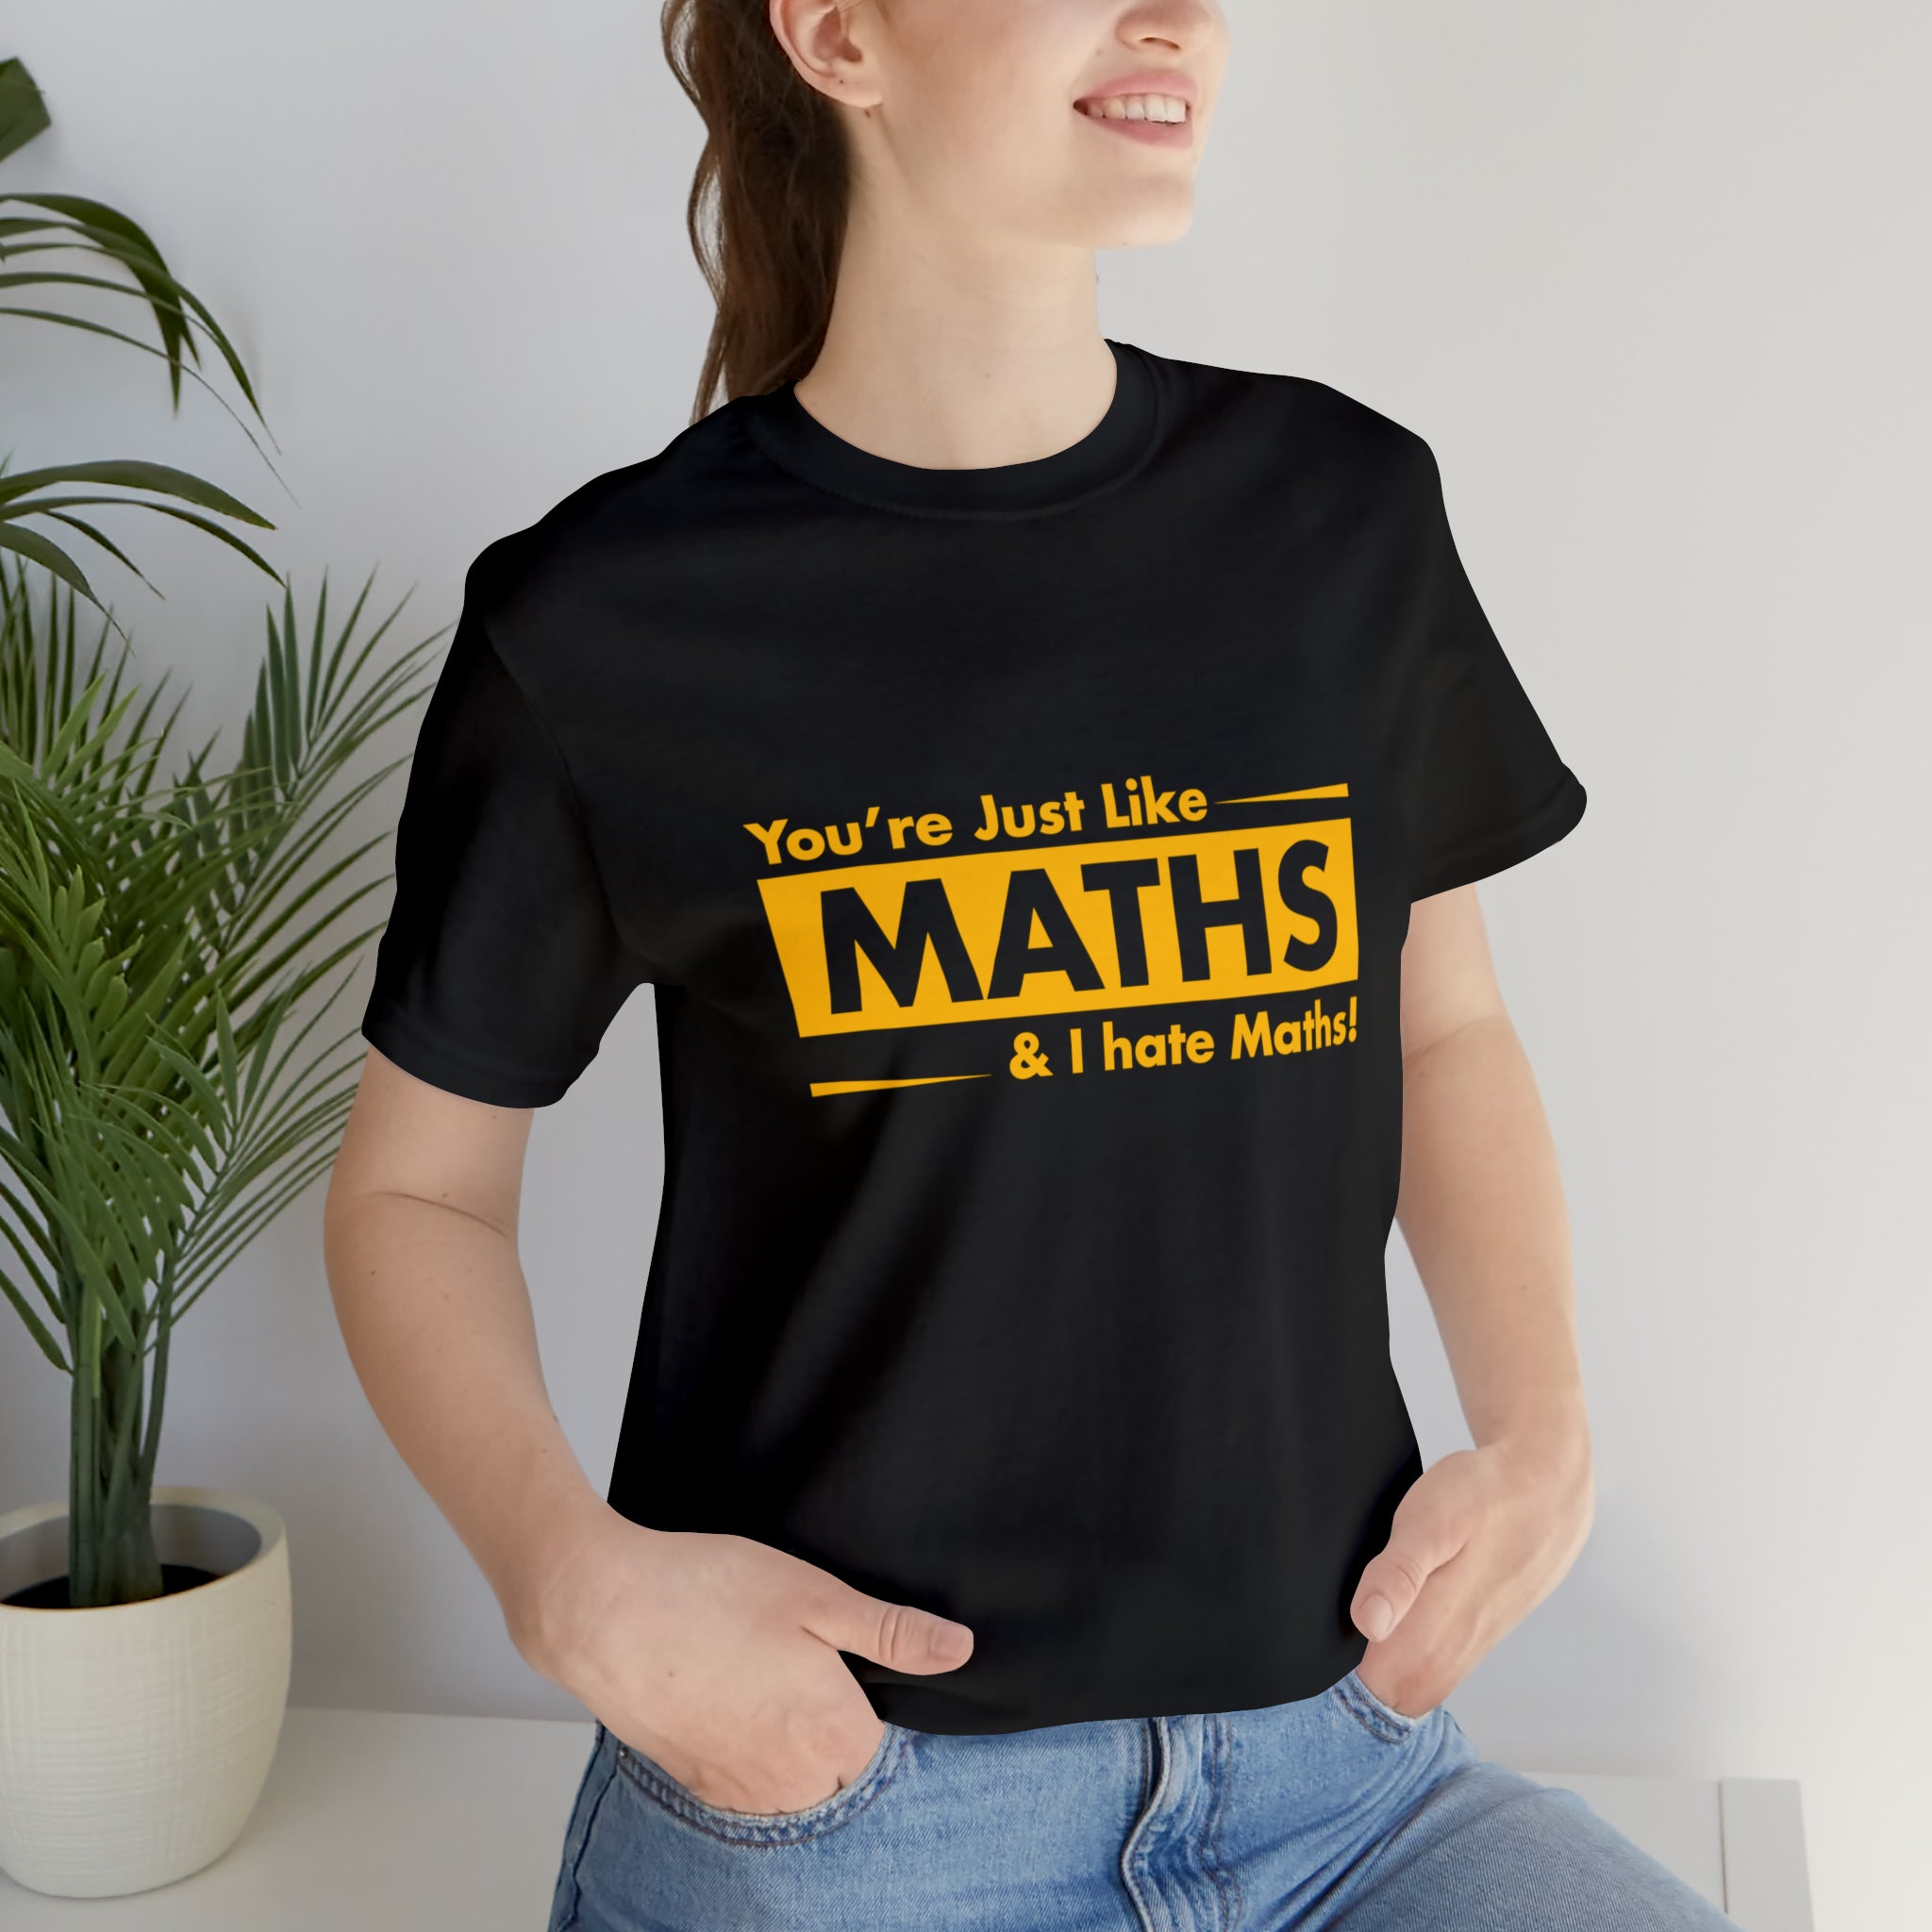 A woman with a great fashion sense wearing a "You are just like maths and I hate maths" T-shirt.